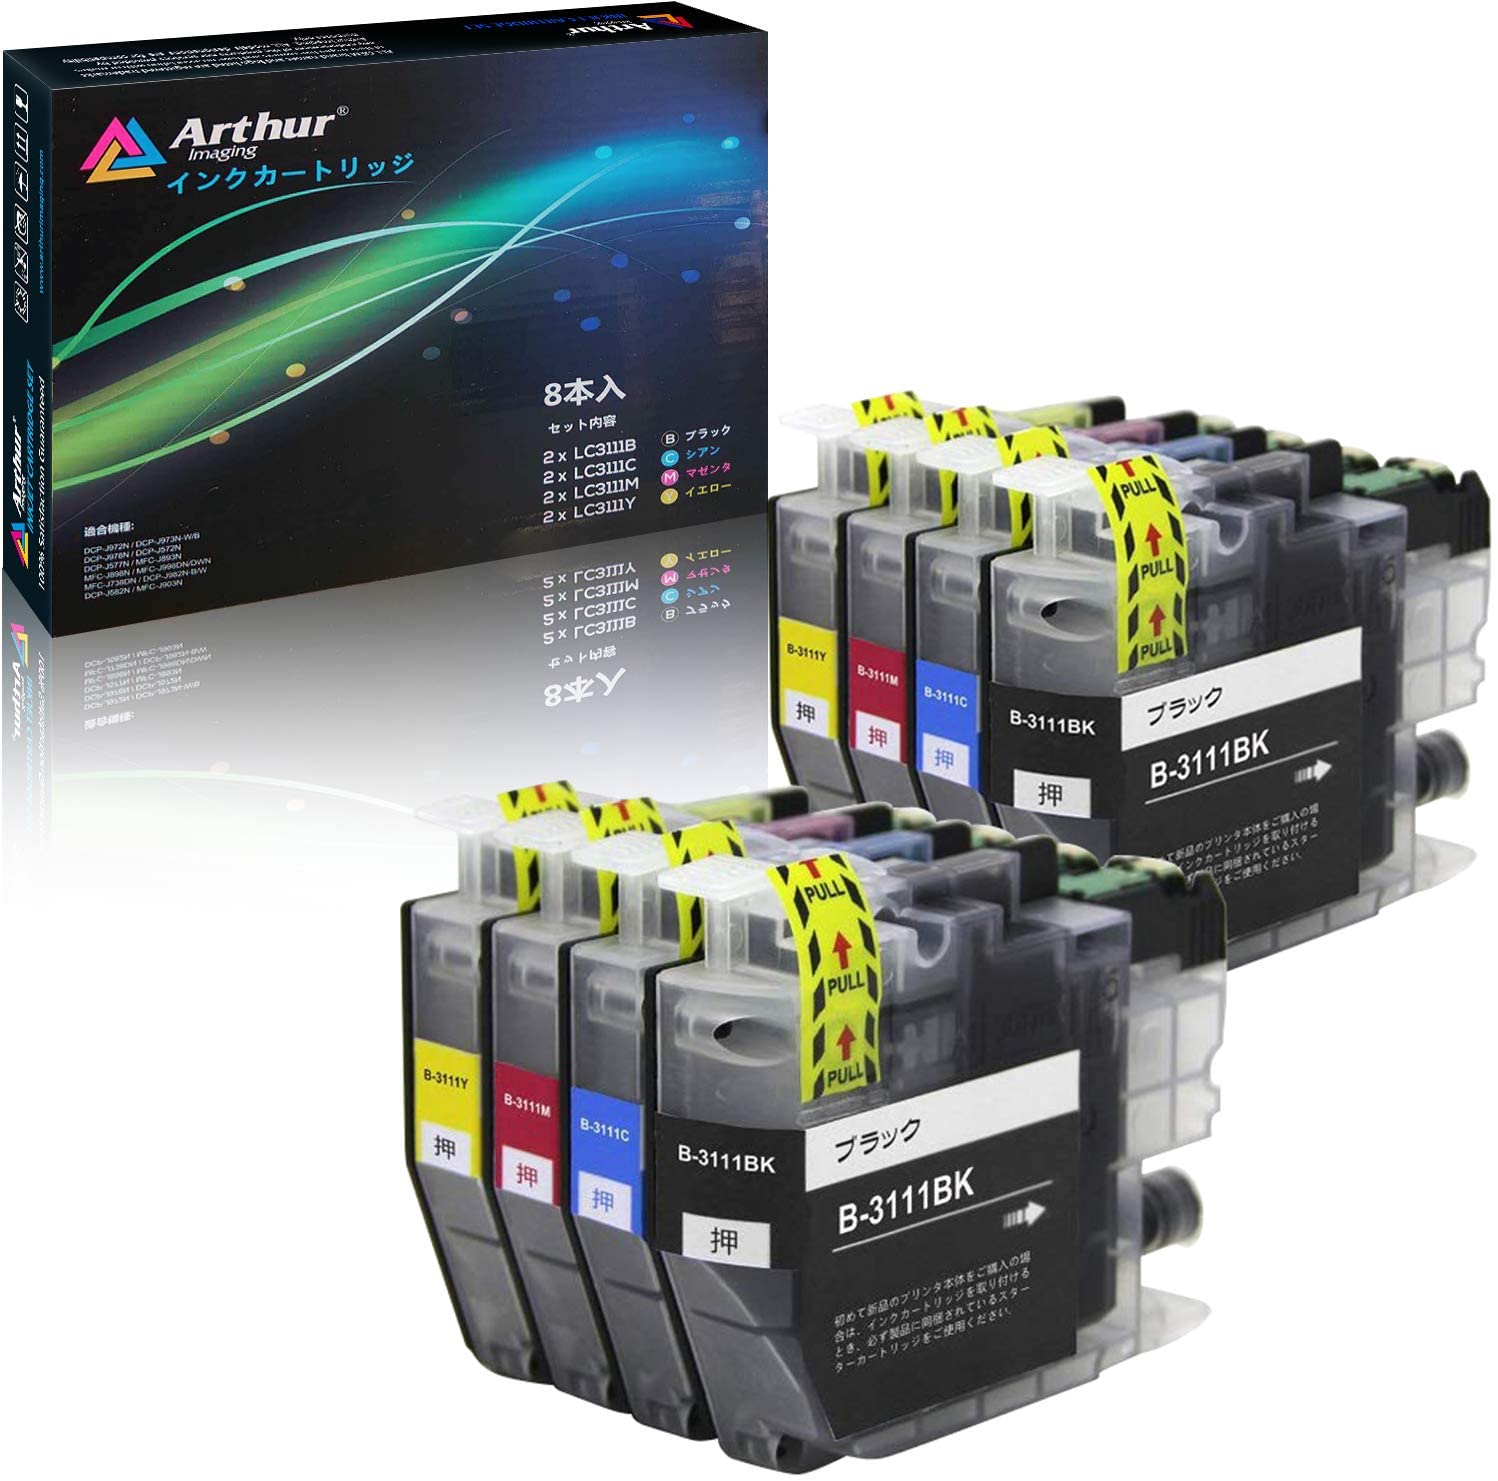 Arthur Imaging Compatible Ink Cartridge Replacement for Brother LC3111